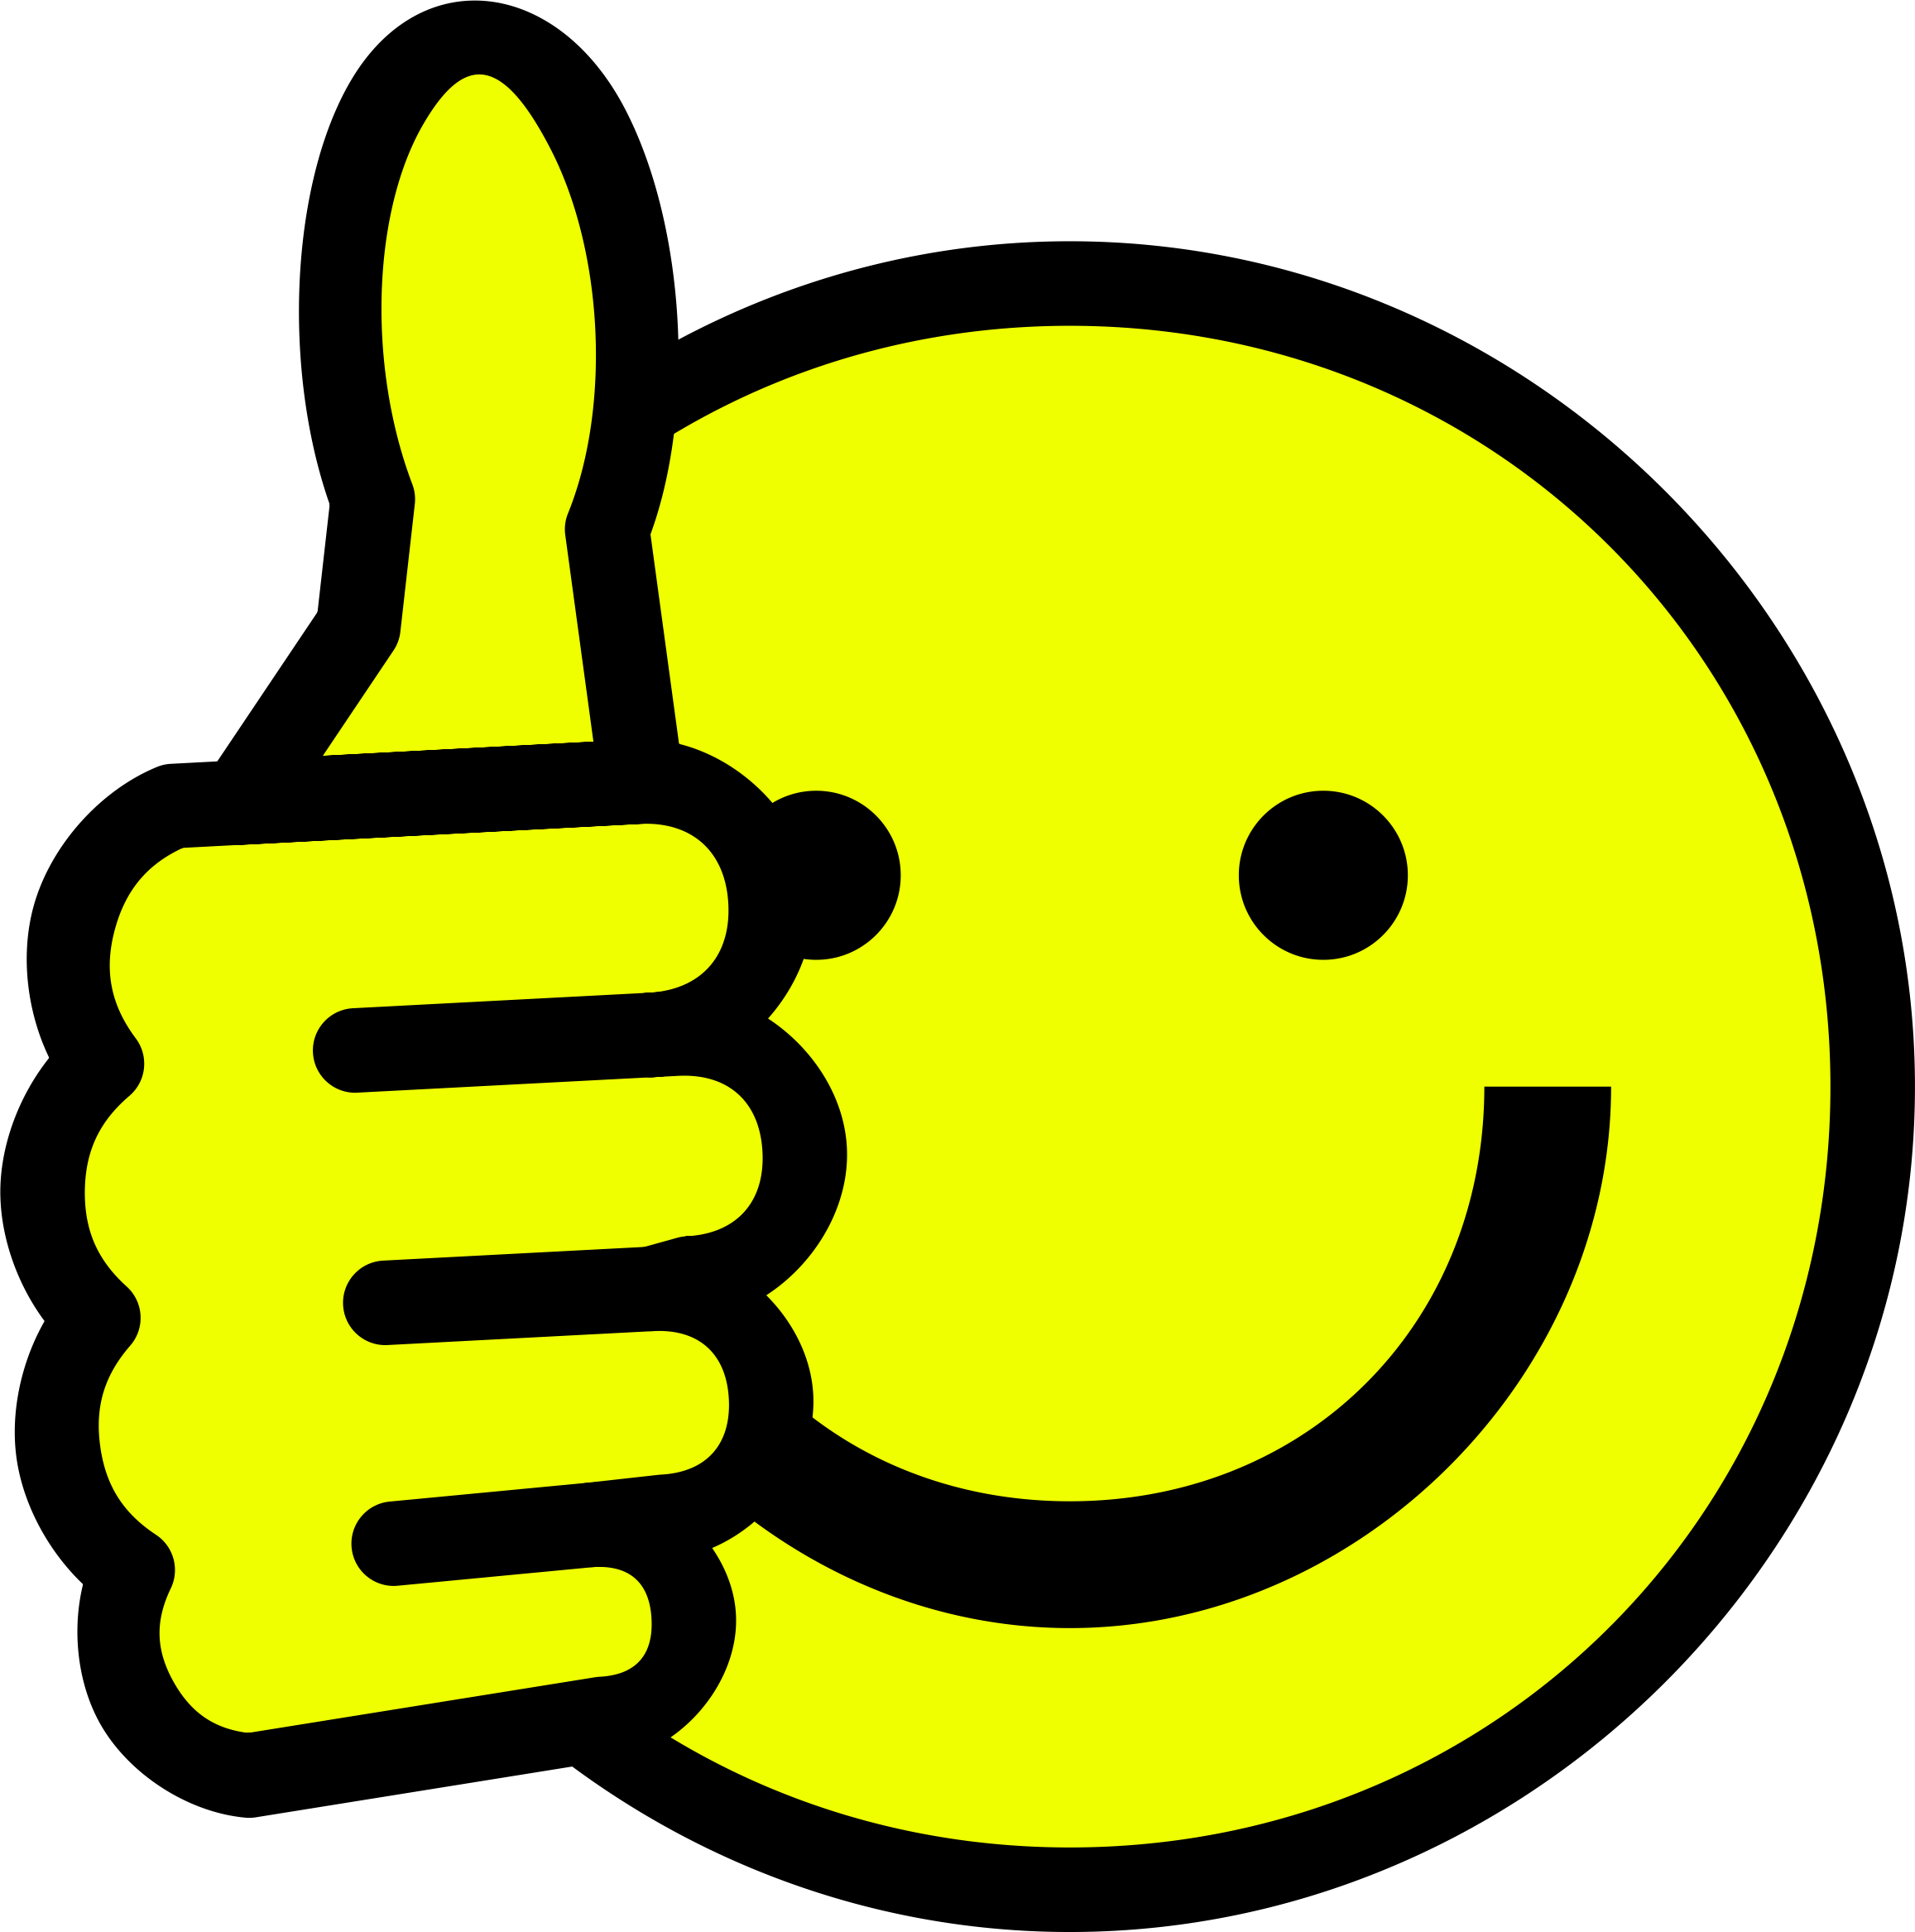 Thumbs up smiley face clip art